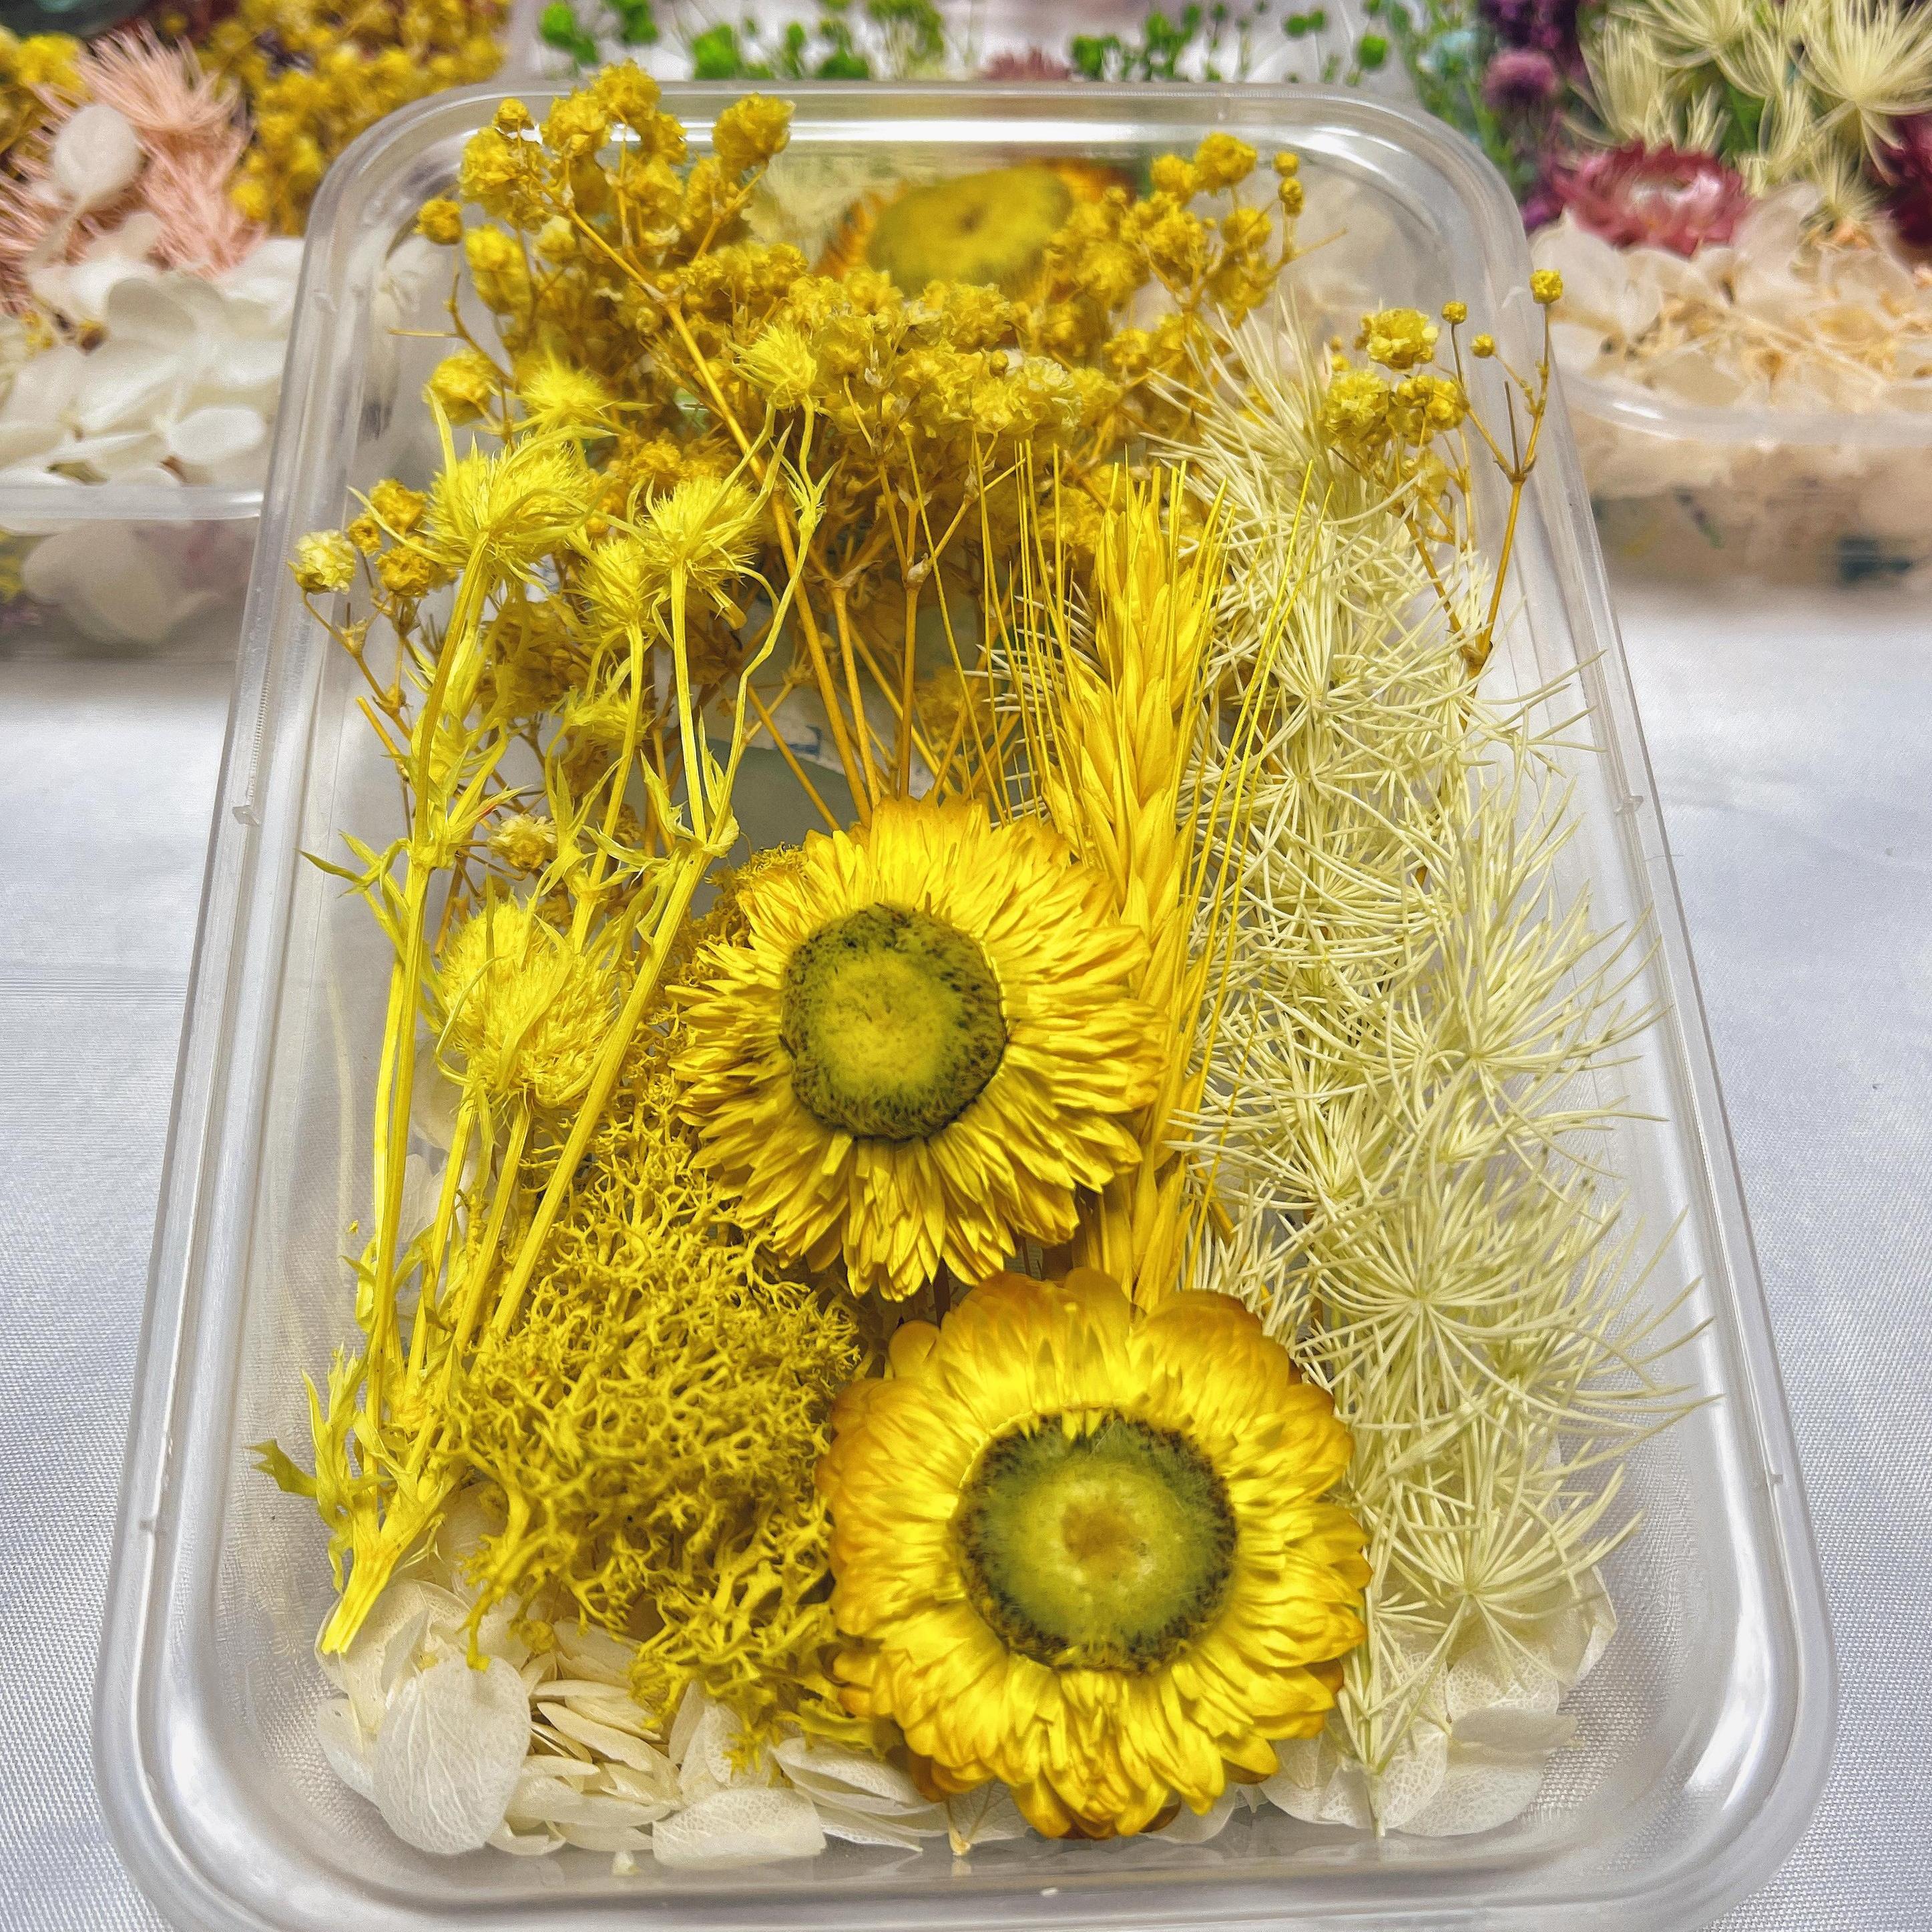 Real Pressed Flower, Flowers for Resin, Dried Daisy Flower Resin, Dry Flowers  for Crafts, Epoxy Mold Fillings, Jewelry Making Flowers 